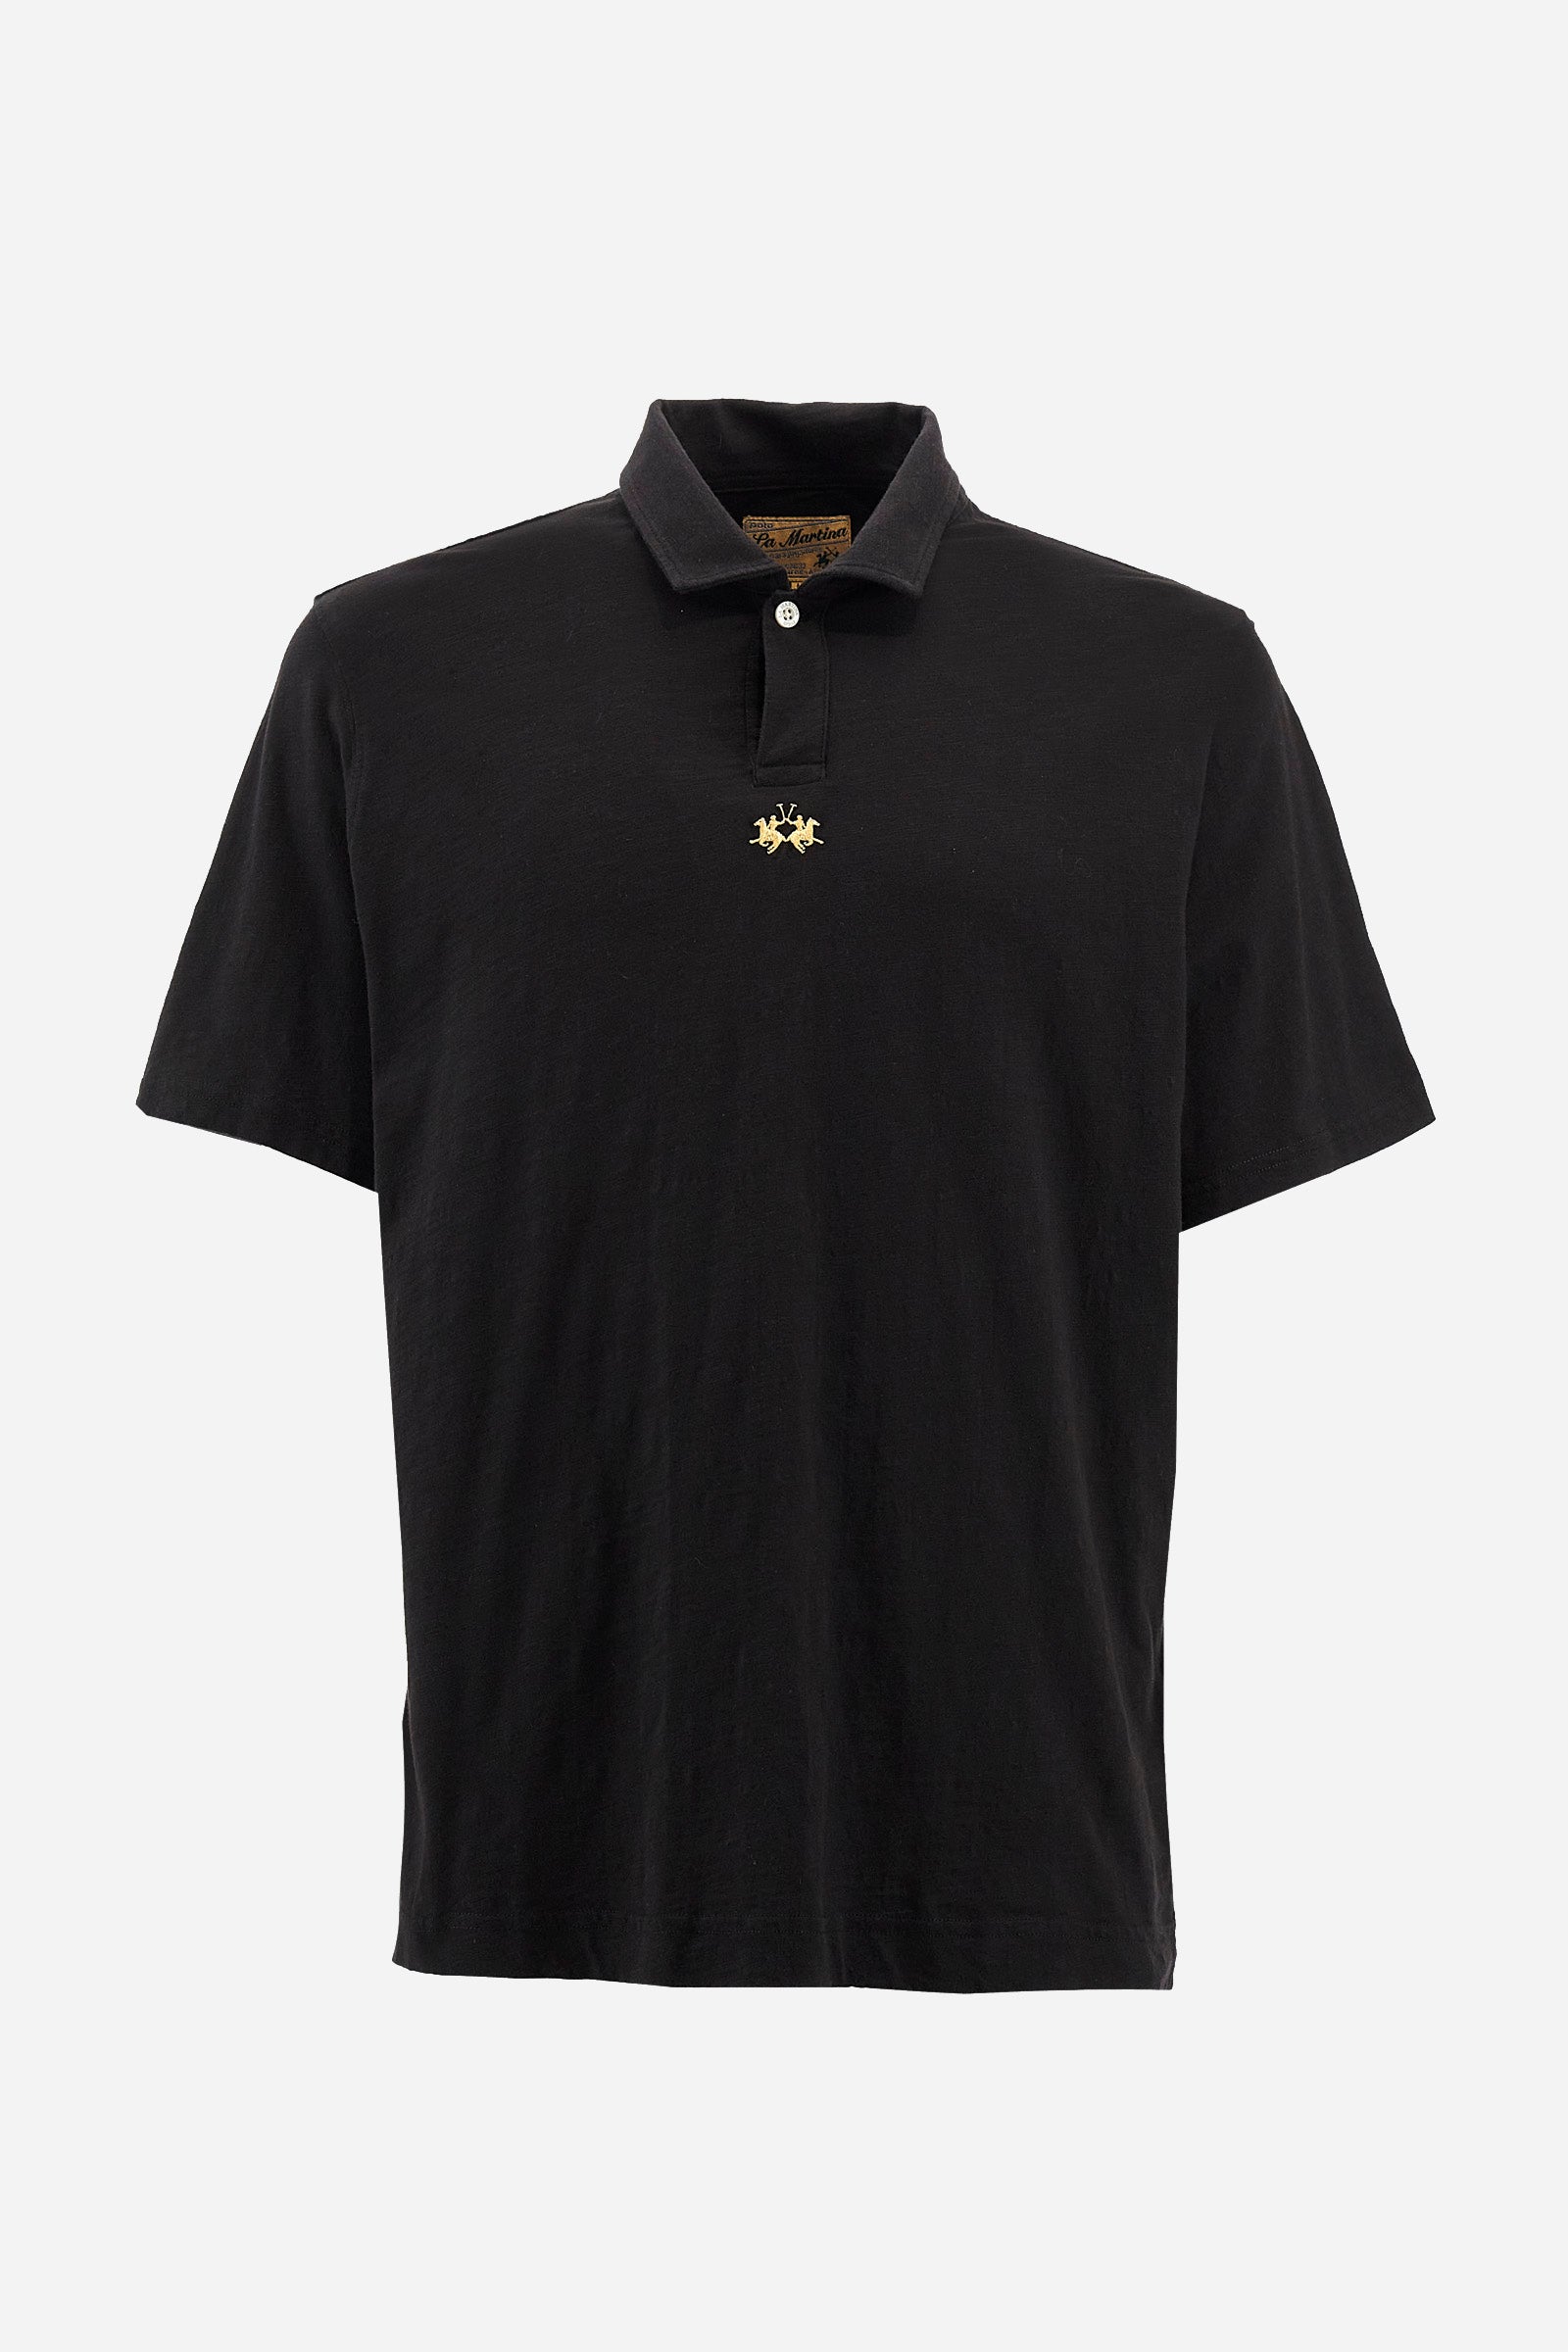 Men's polo shirt in a regular fit - Polo 19-42